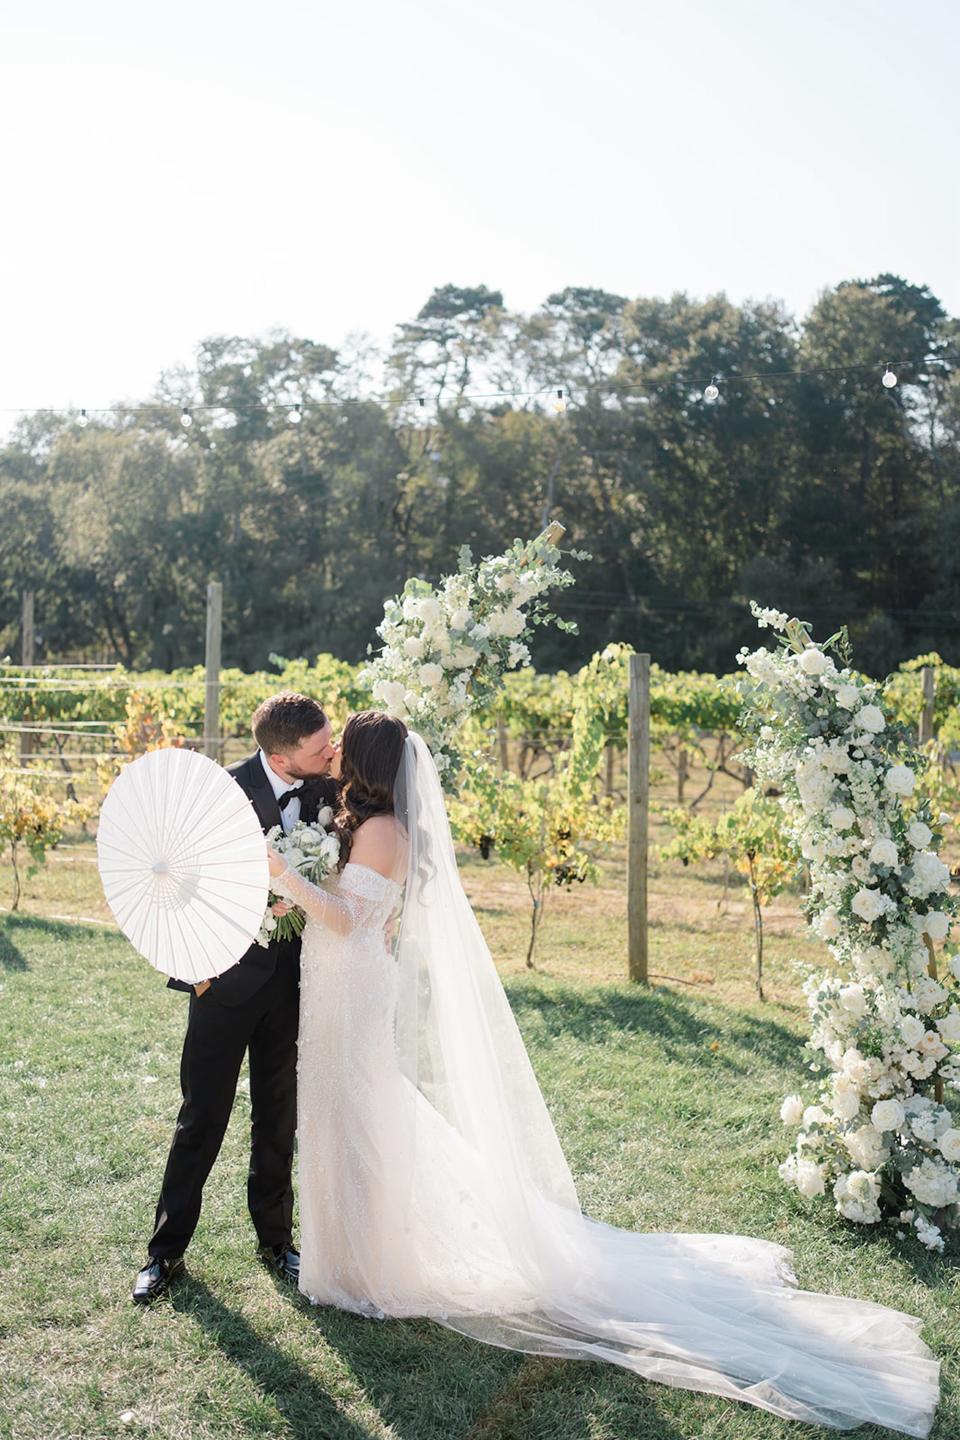 A bride and groom kiss in front of a floral arch. They hold a parasol in front of them.